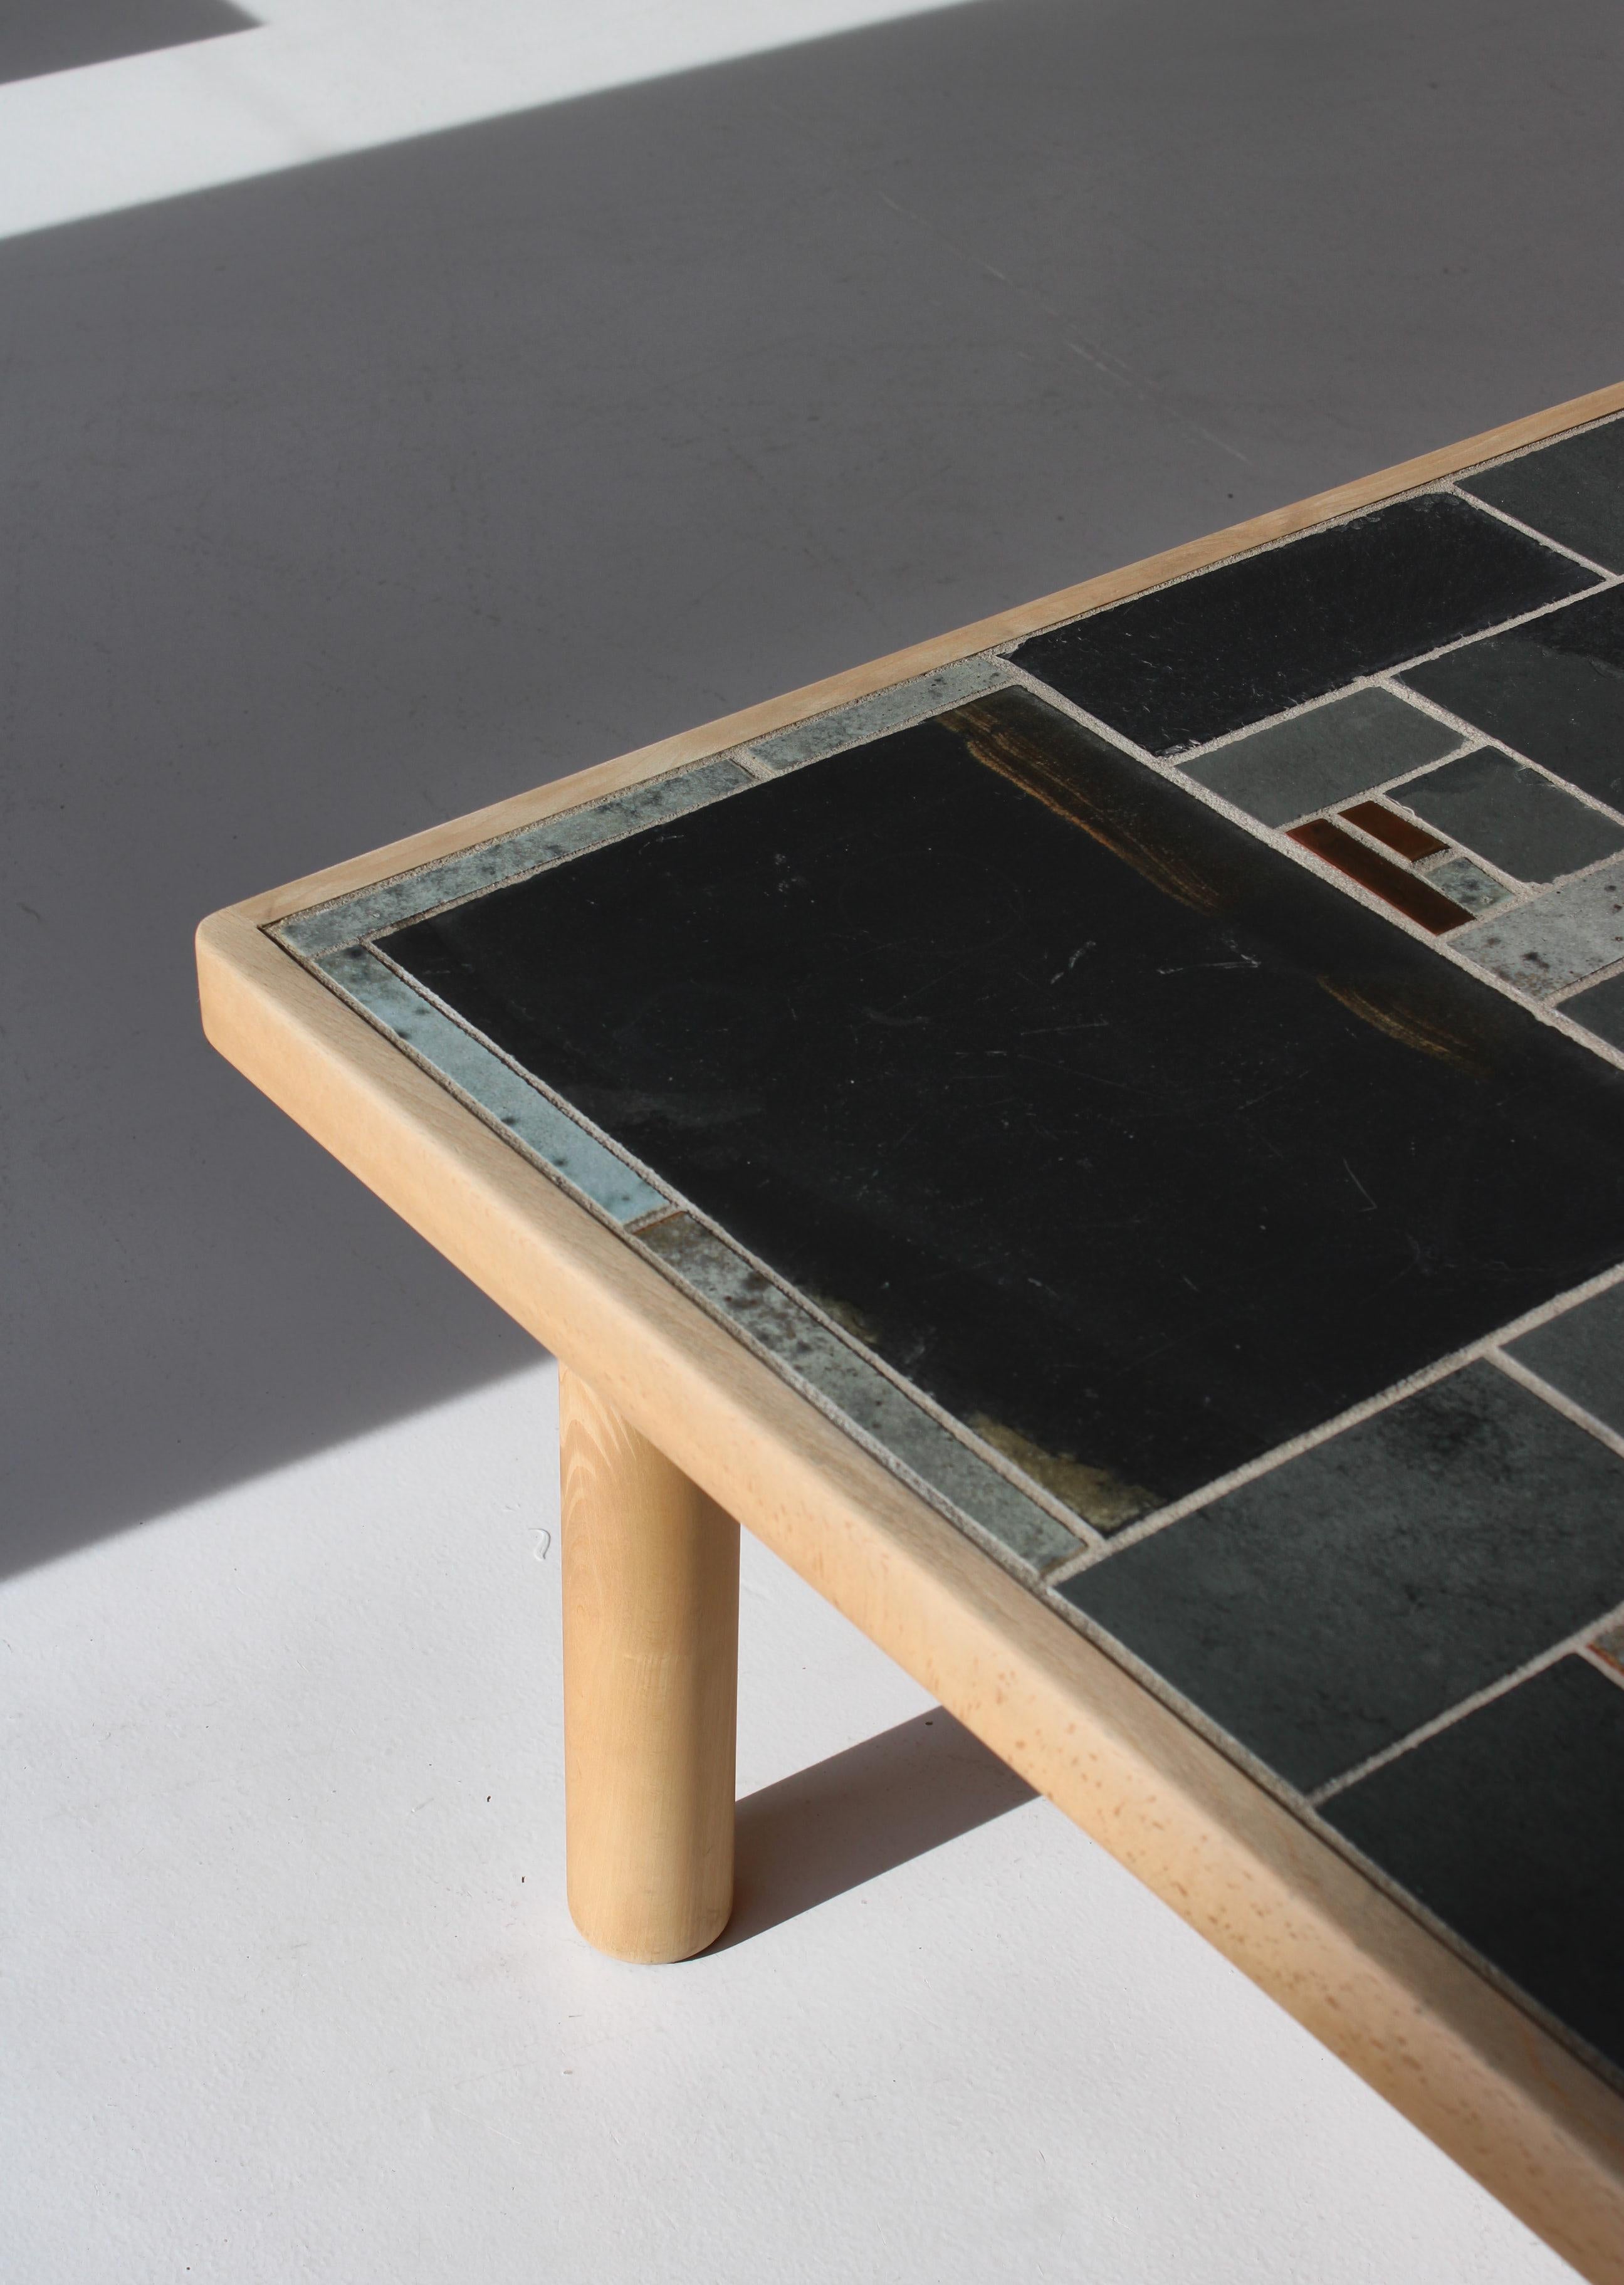 Scandinavian Modern Square Coffee Table in Beechwood and Ceramic Tiles by Sallingboe, Denmark, 1970s For Sale